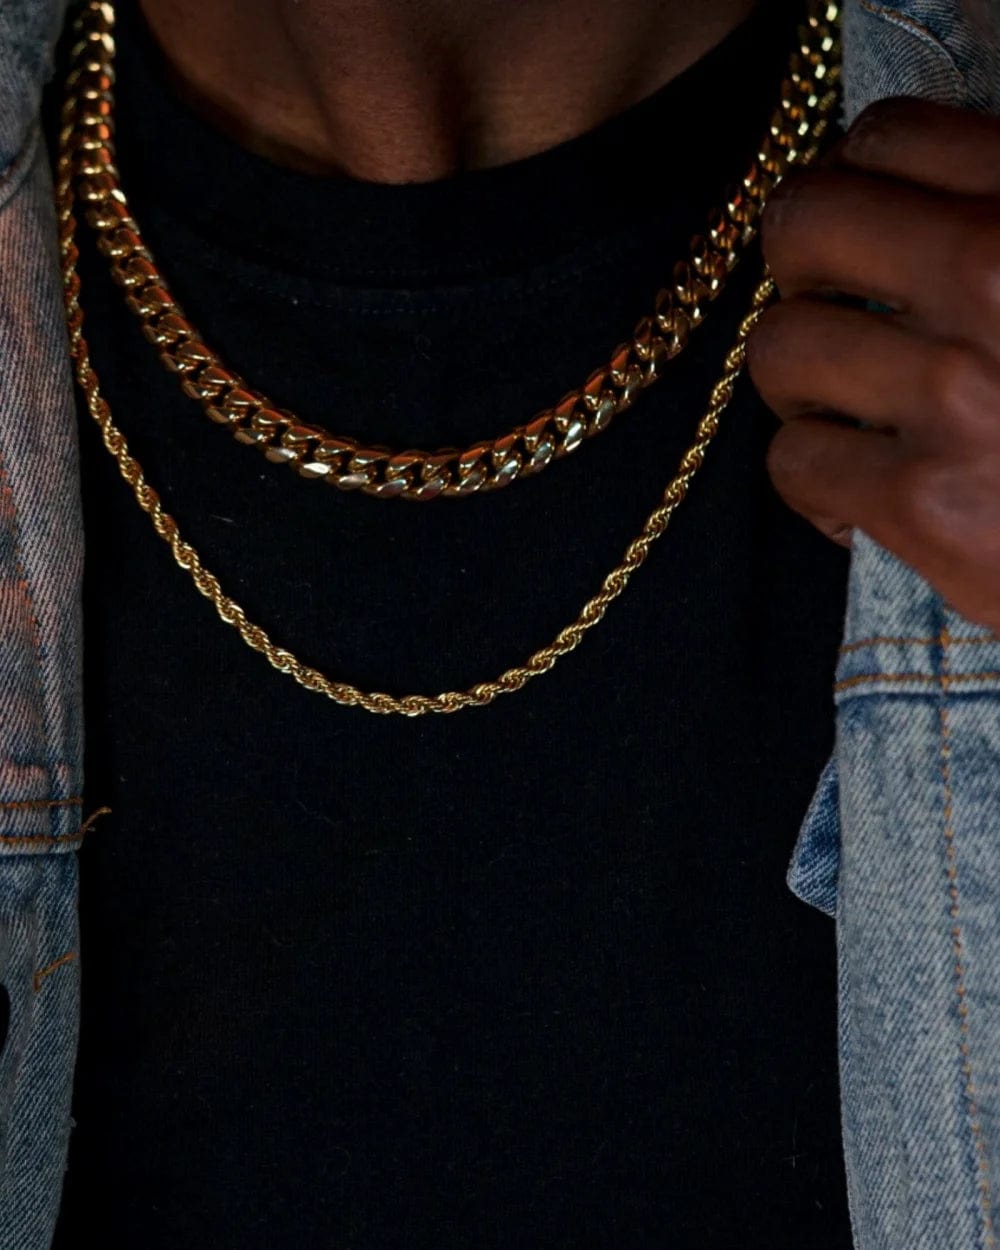 Chain Rope Chain - Gold